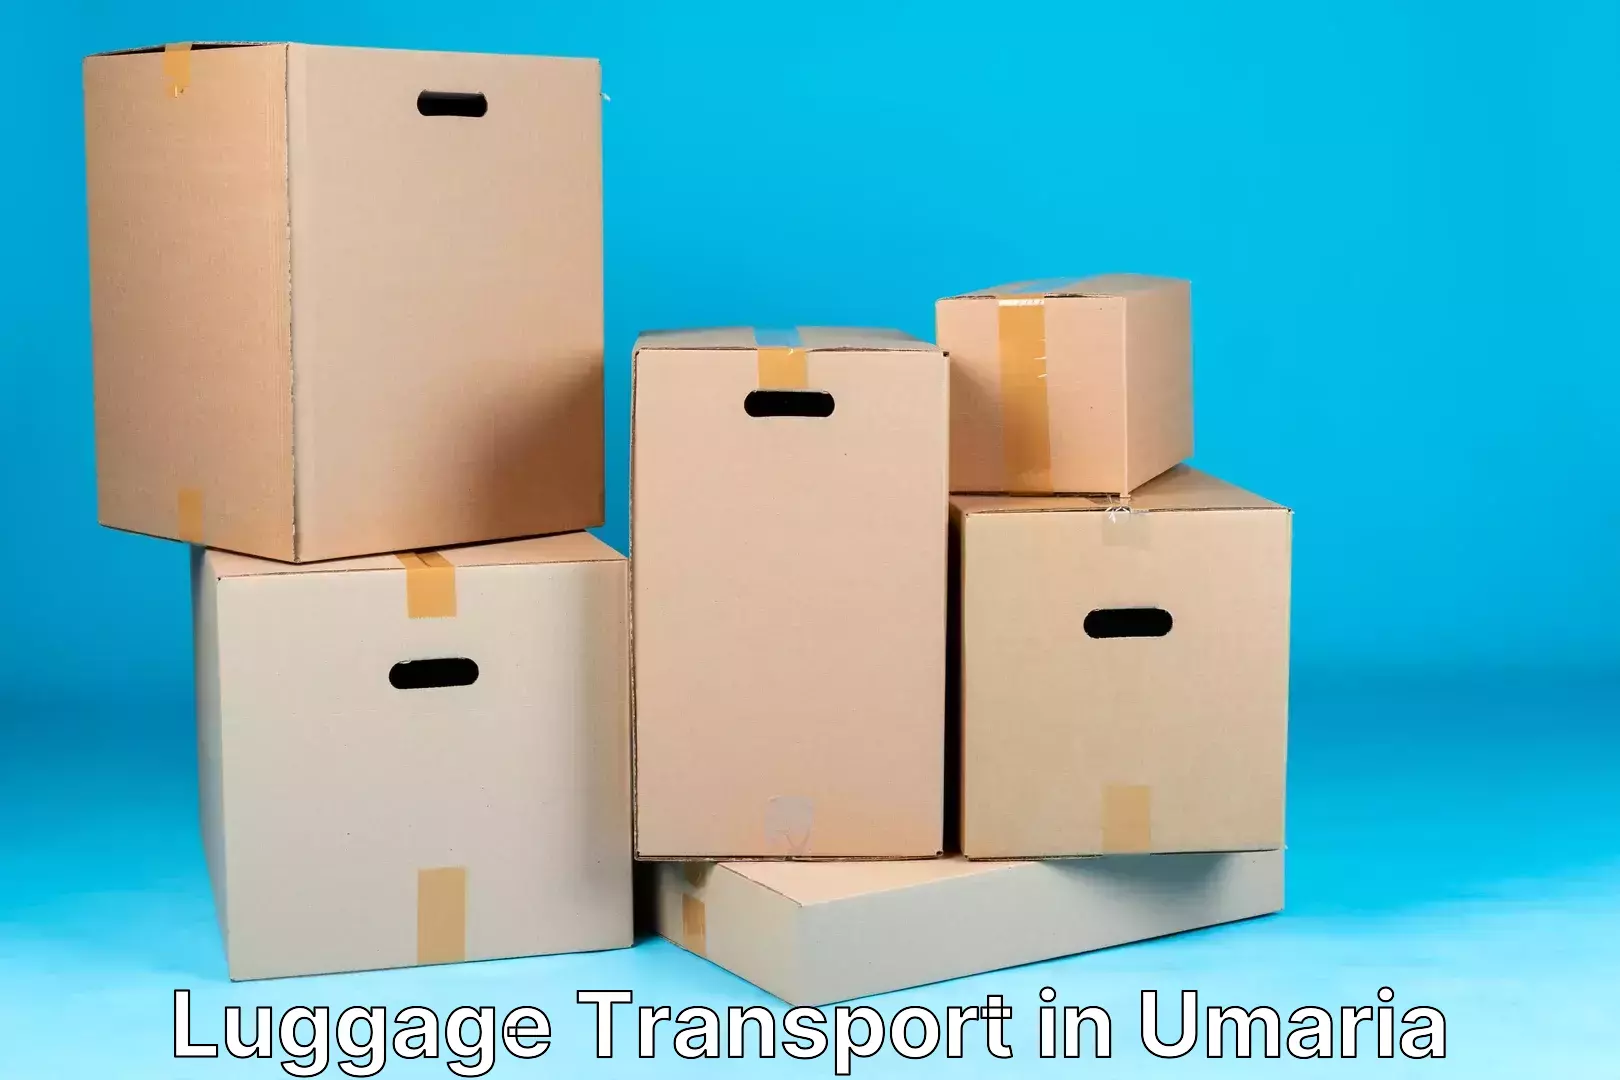 Luggage shipping service in Umaria